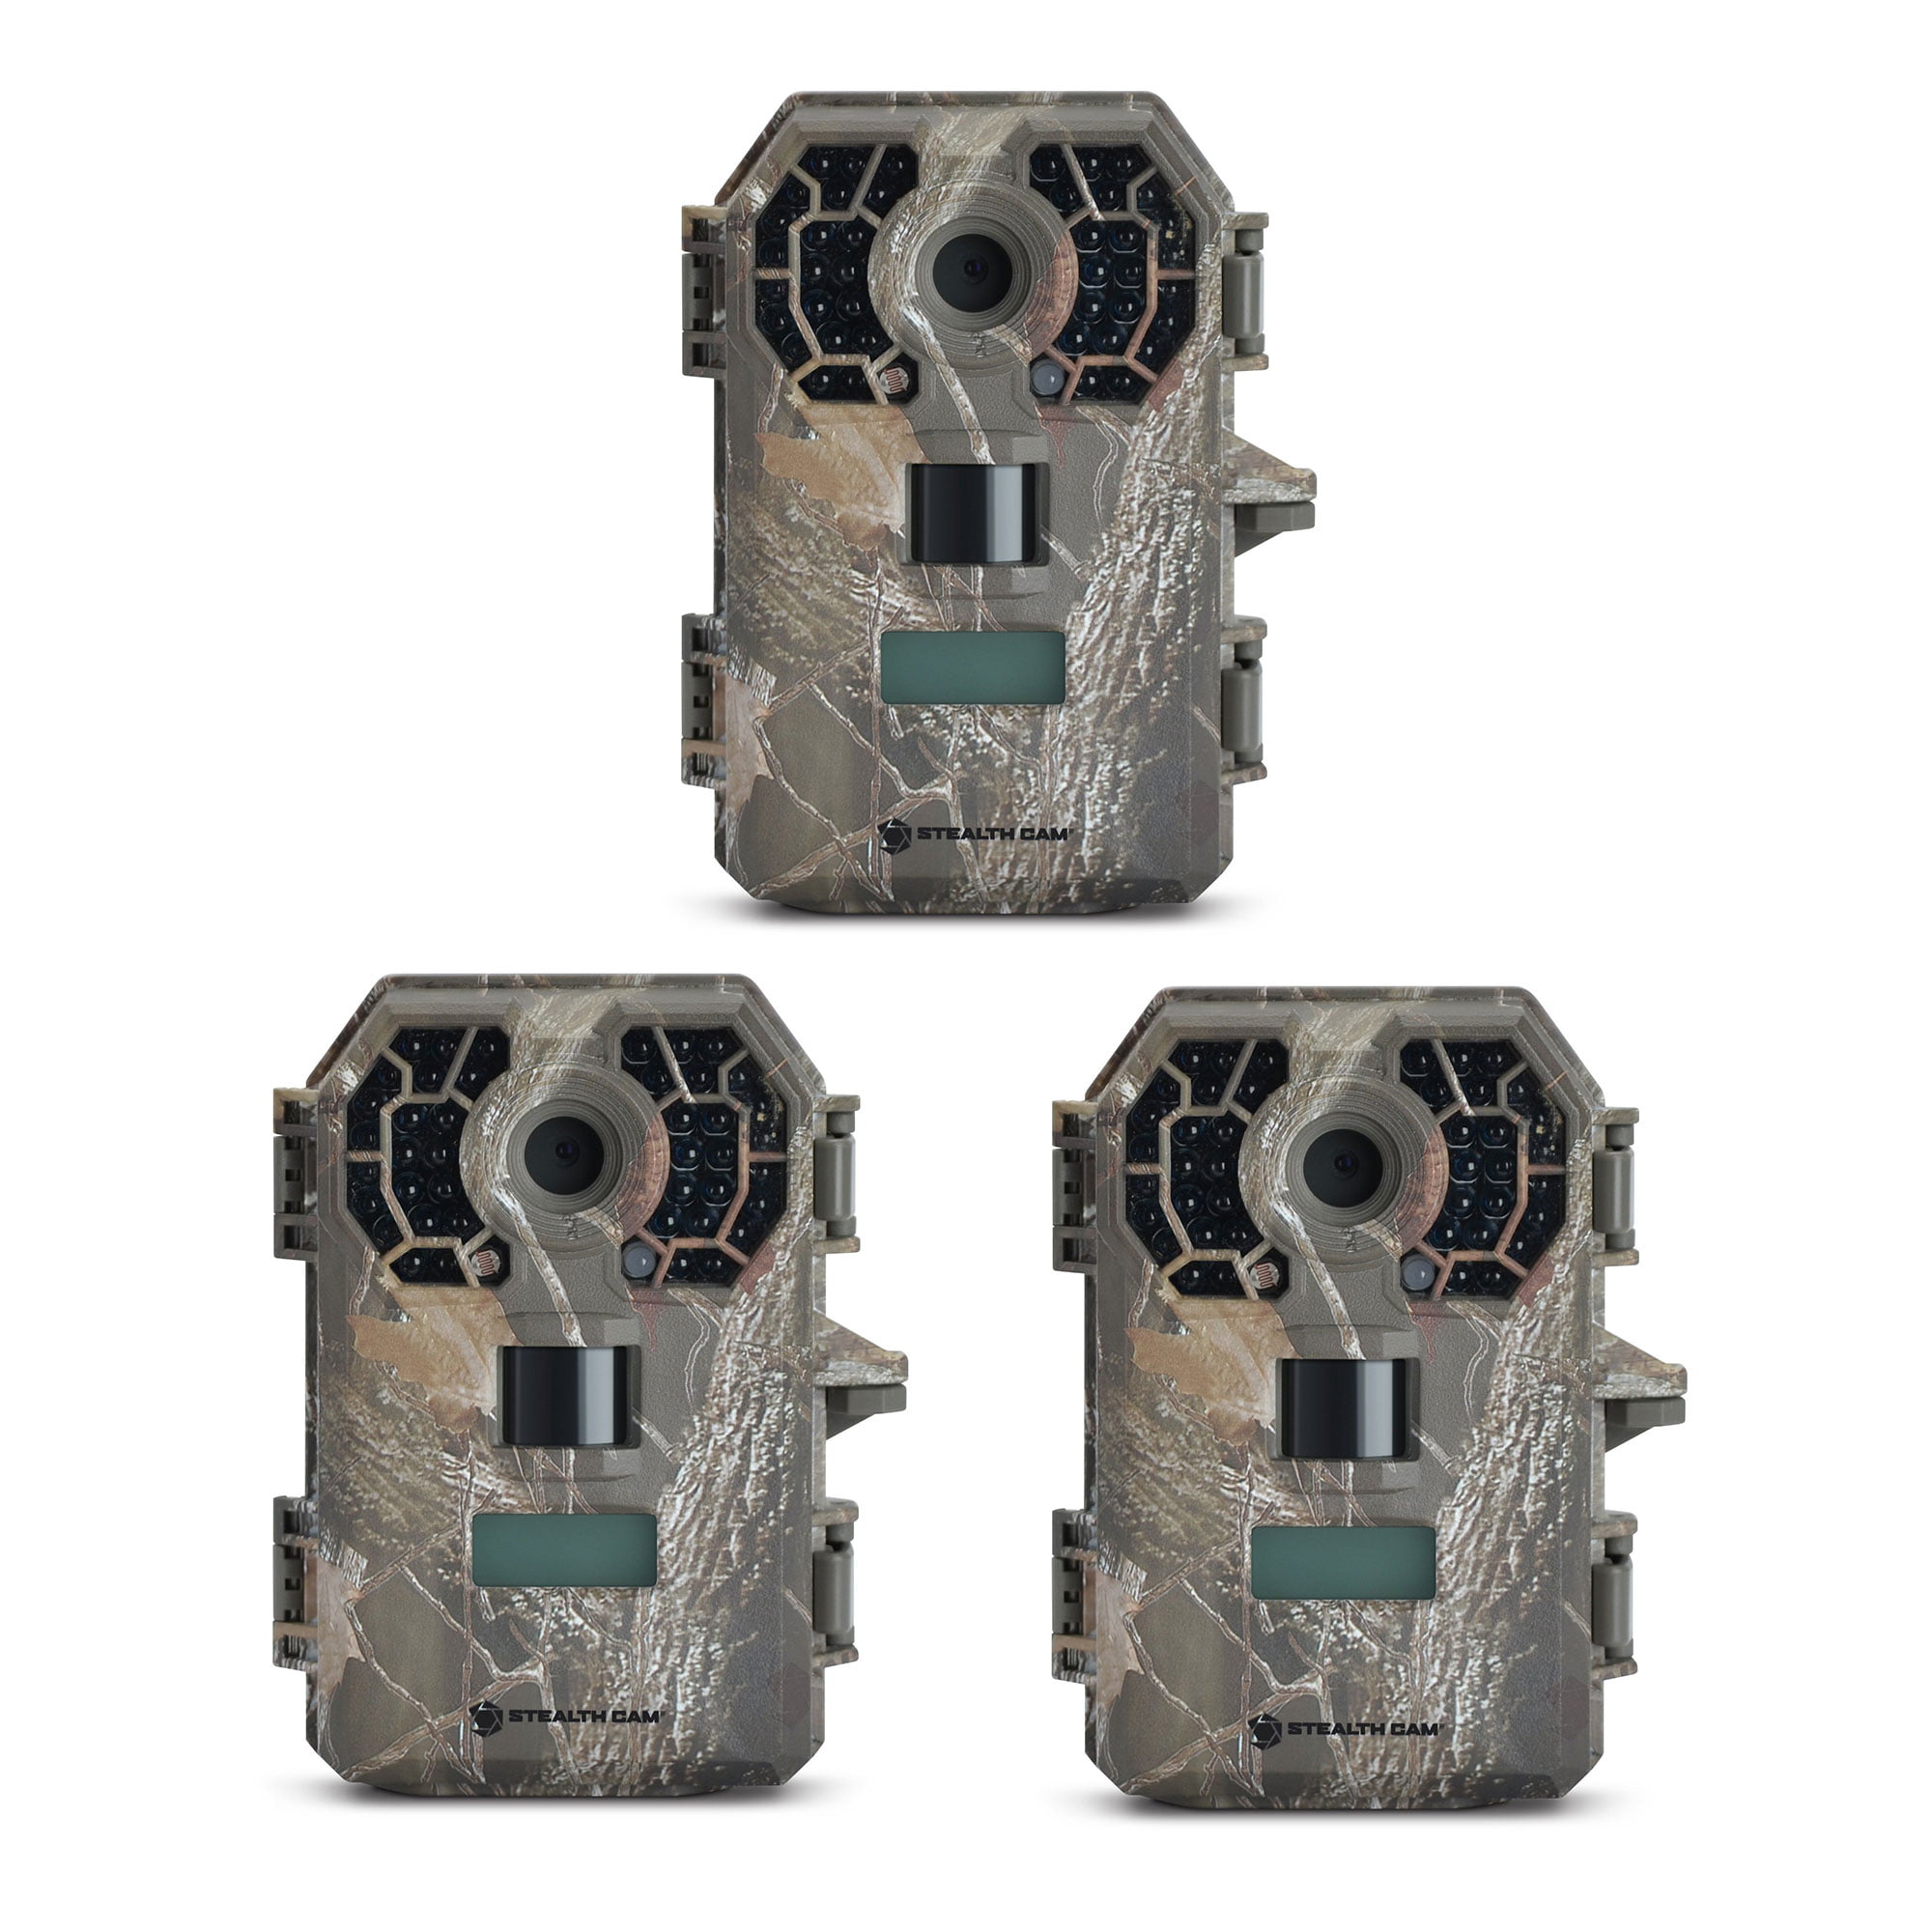 Stealth Cam 2020 G42NG 24MP Trail Camera 2-Pack with Cable Locks and 4 Cards Kit